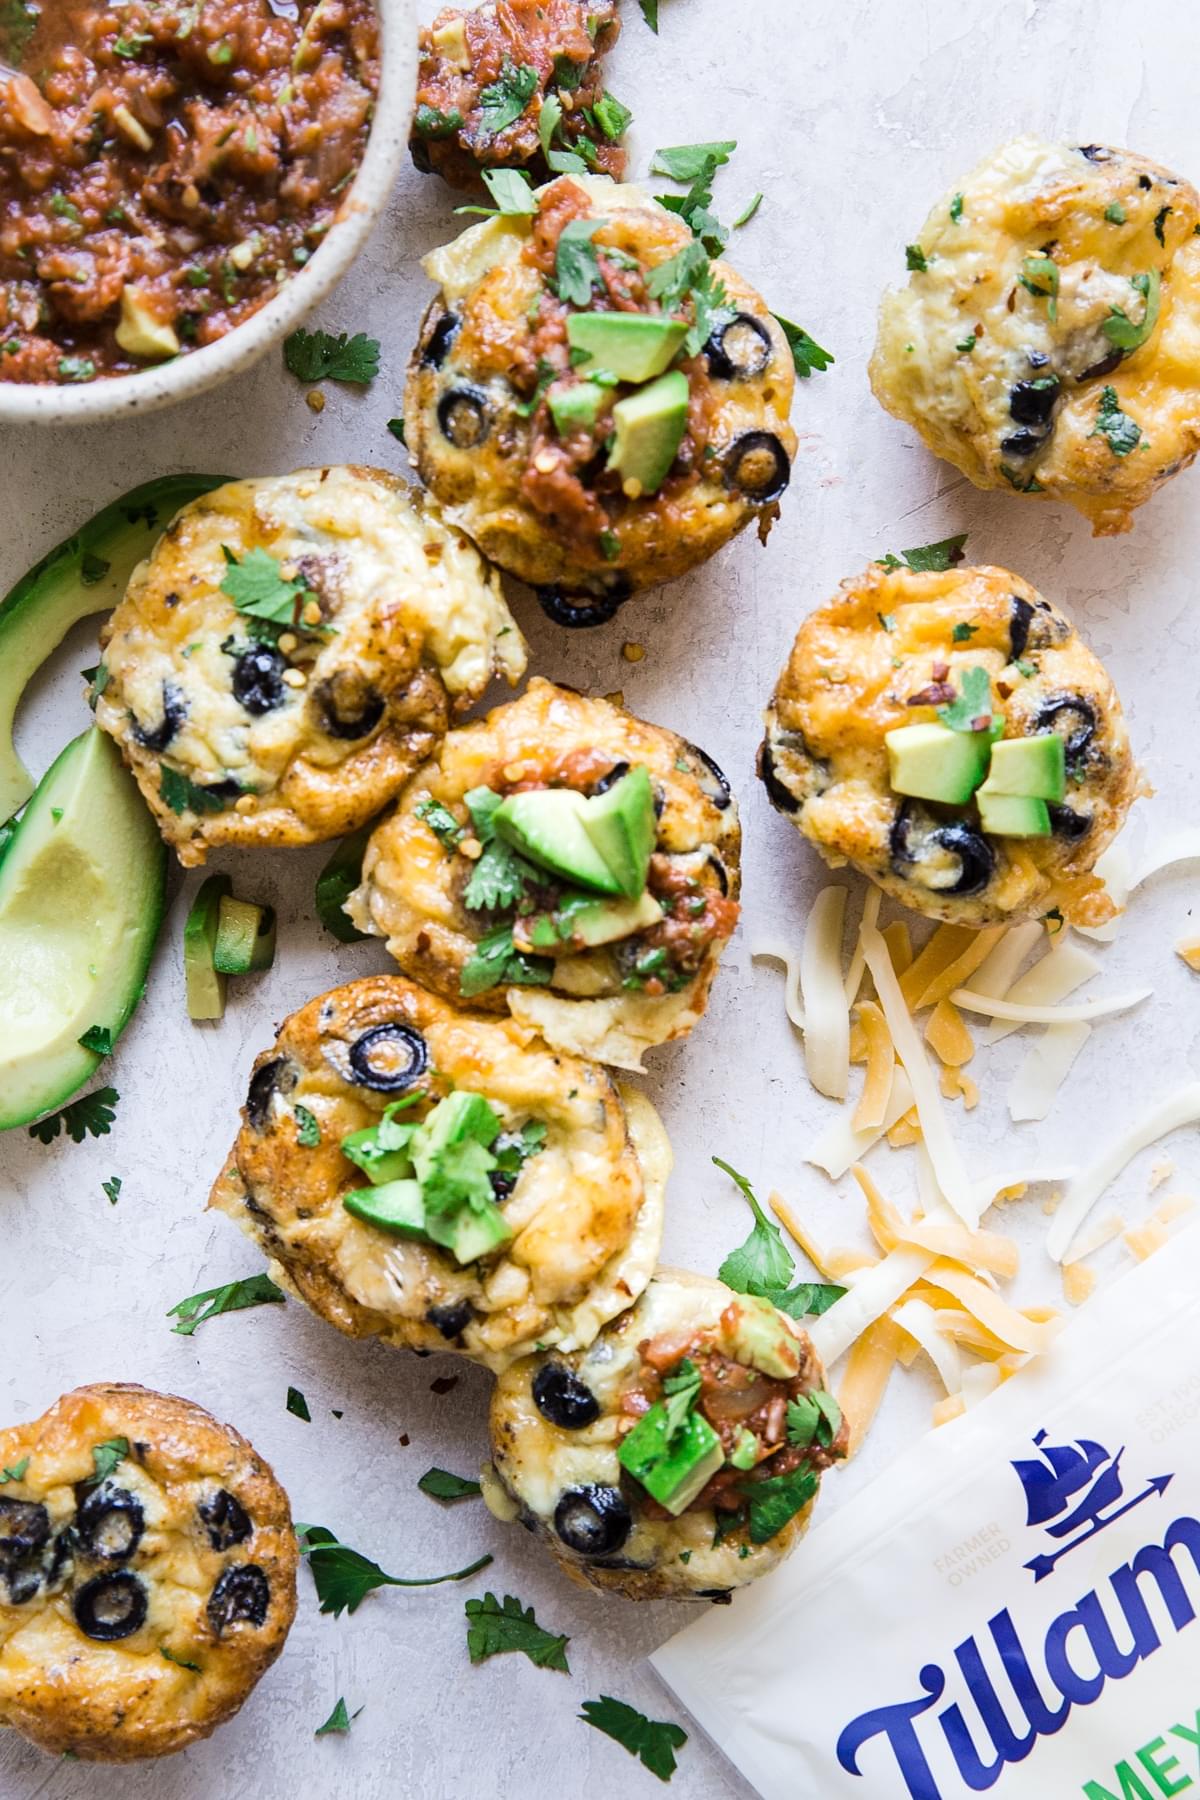 Egg and sausage muffins topped with avocado, olives and grated cheese